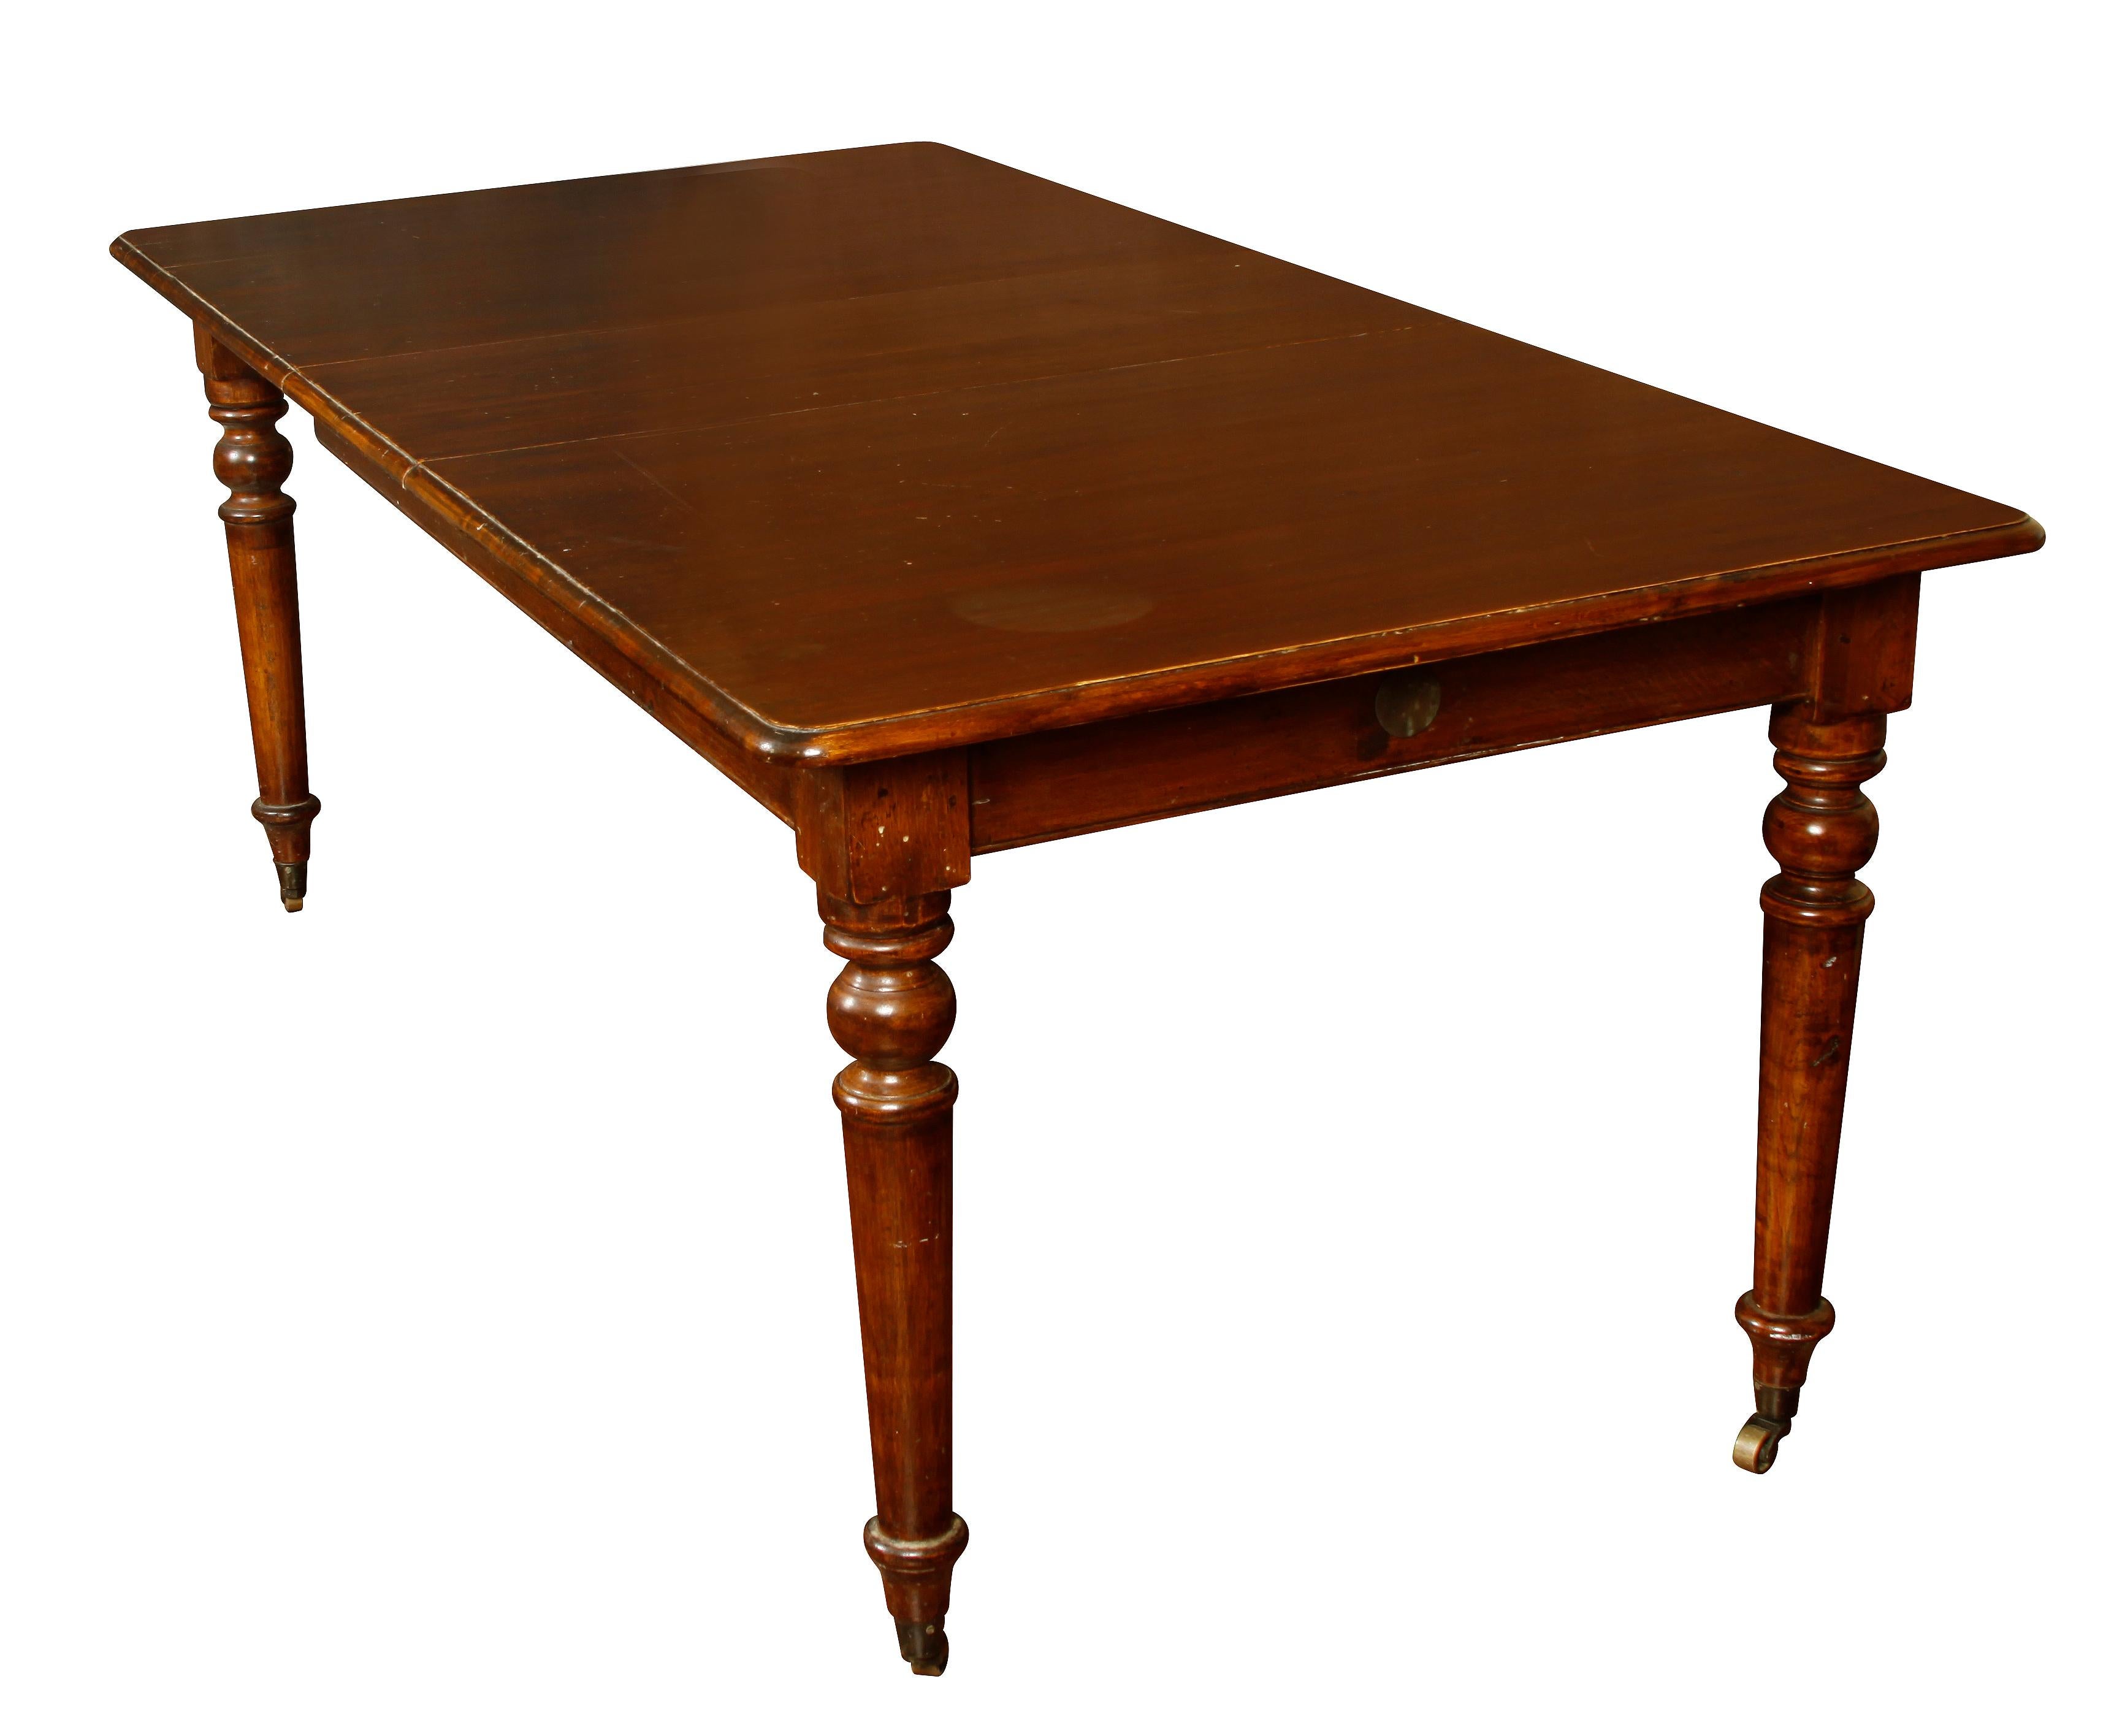 Vintage English dining table with one leaf, on casters with ringed balaster legs. Fully extends to 80